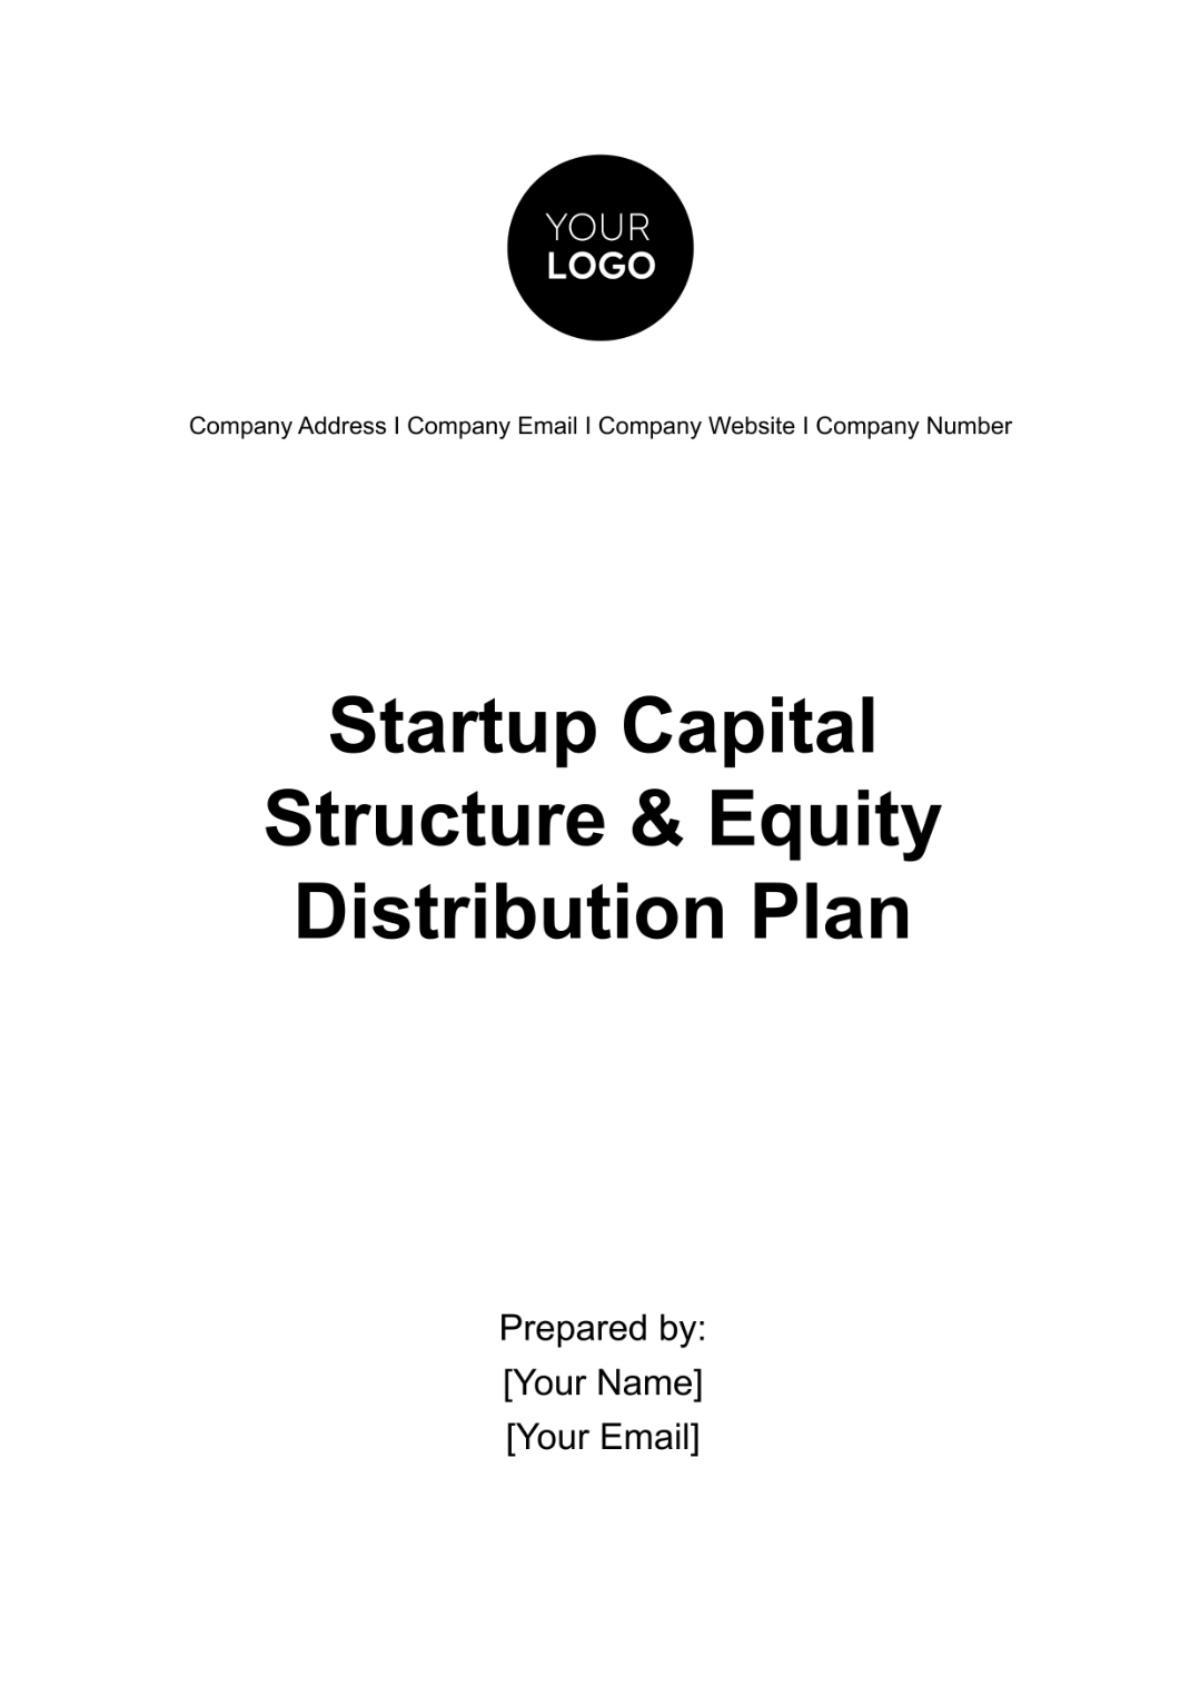 Startup Capital Structure and Equity Distribution Plan Template